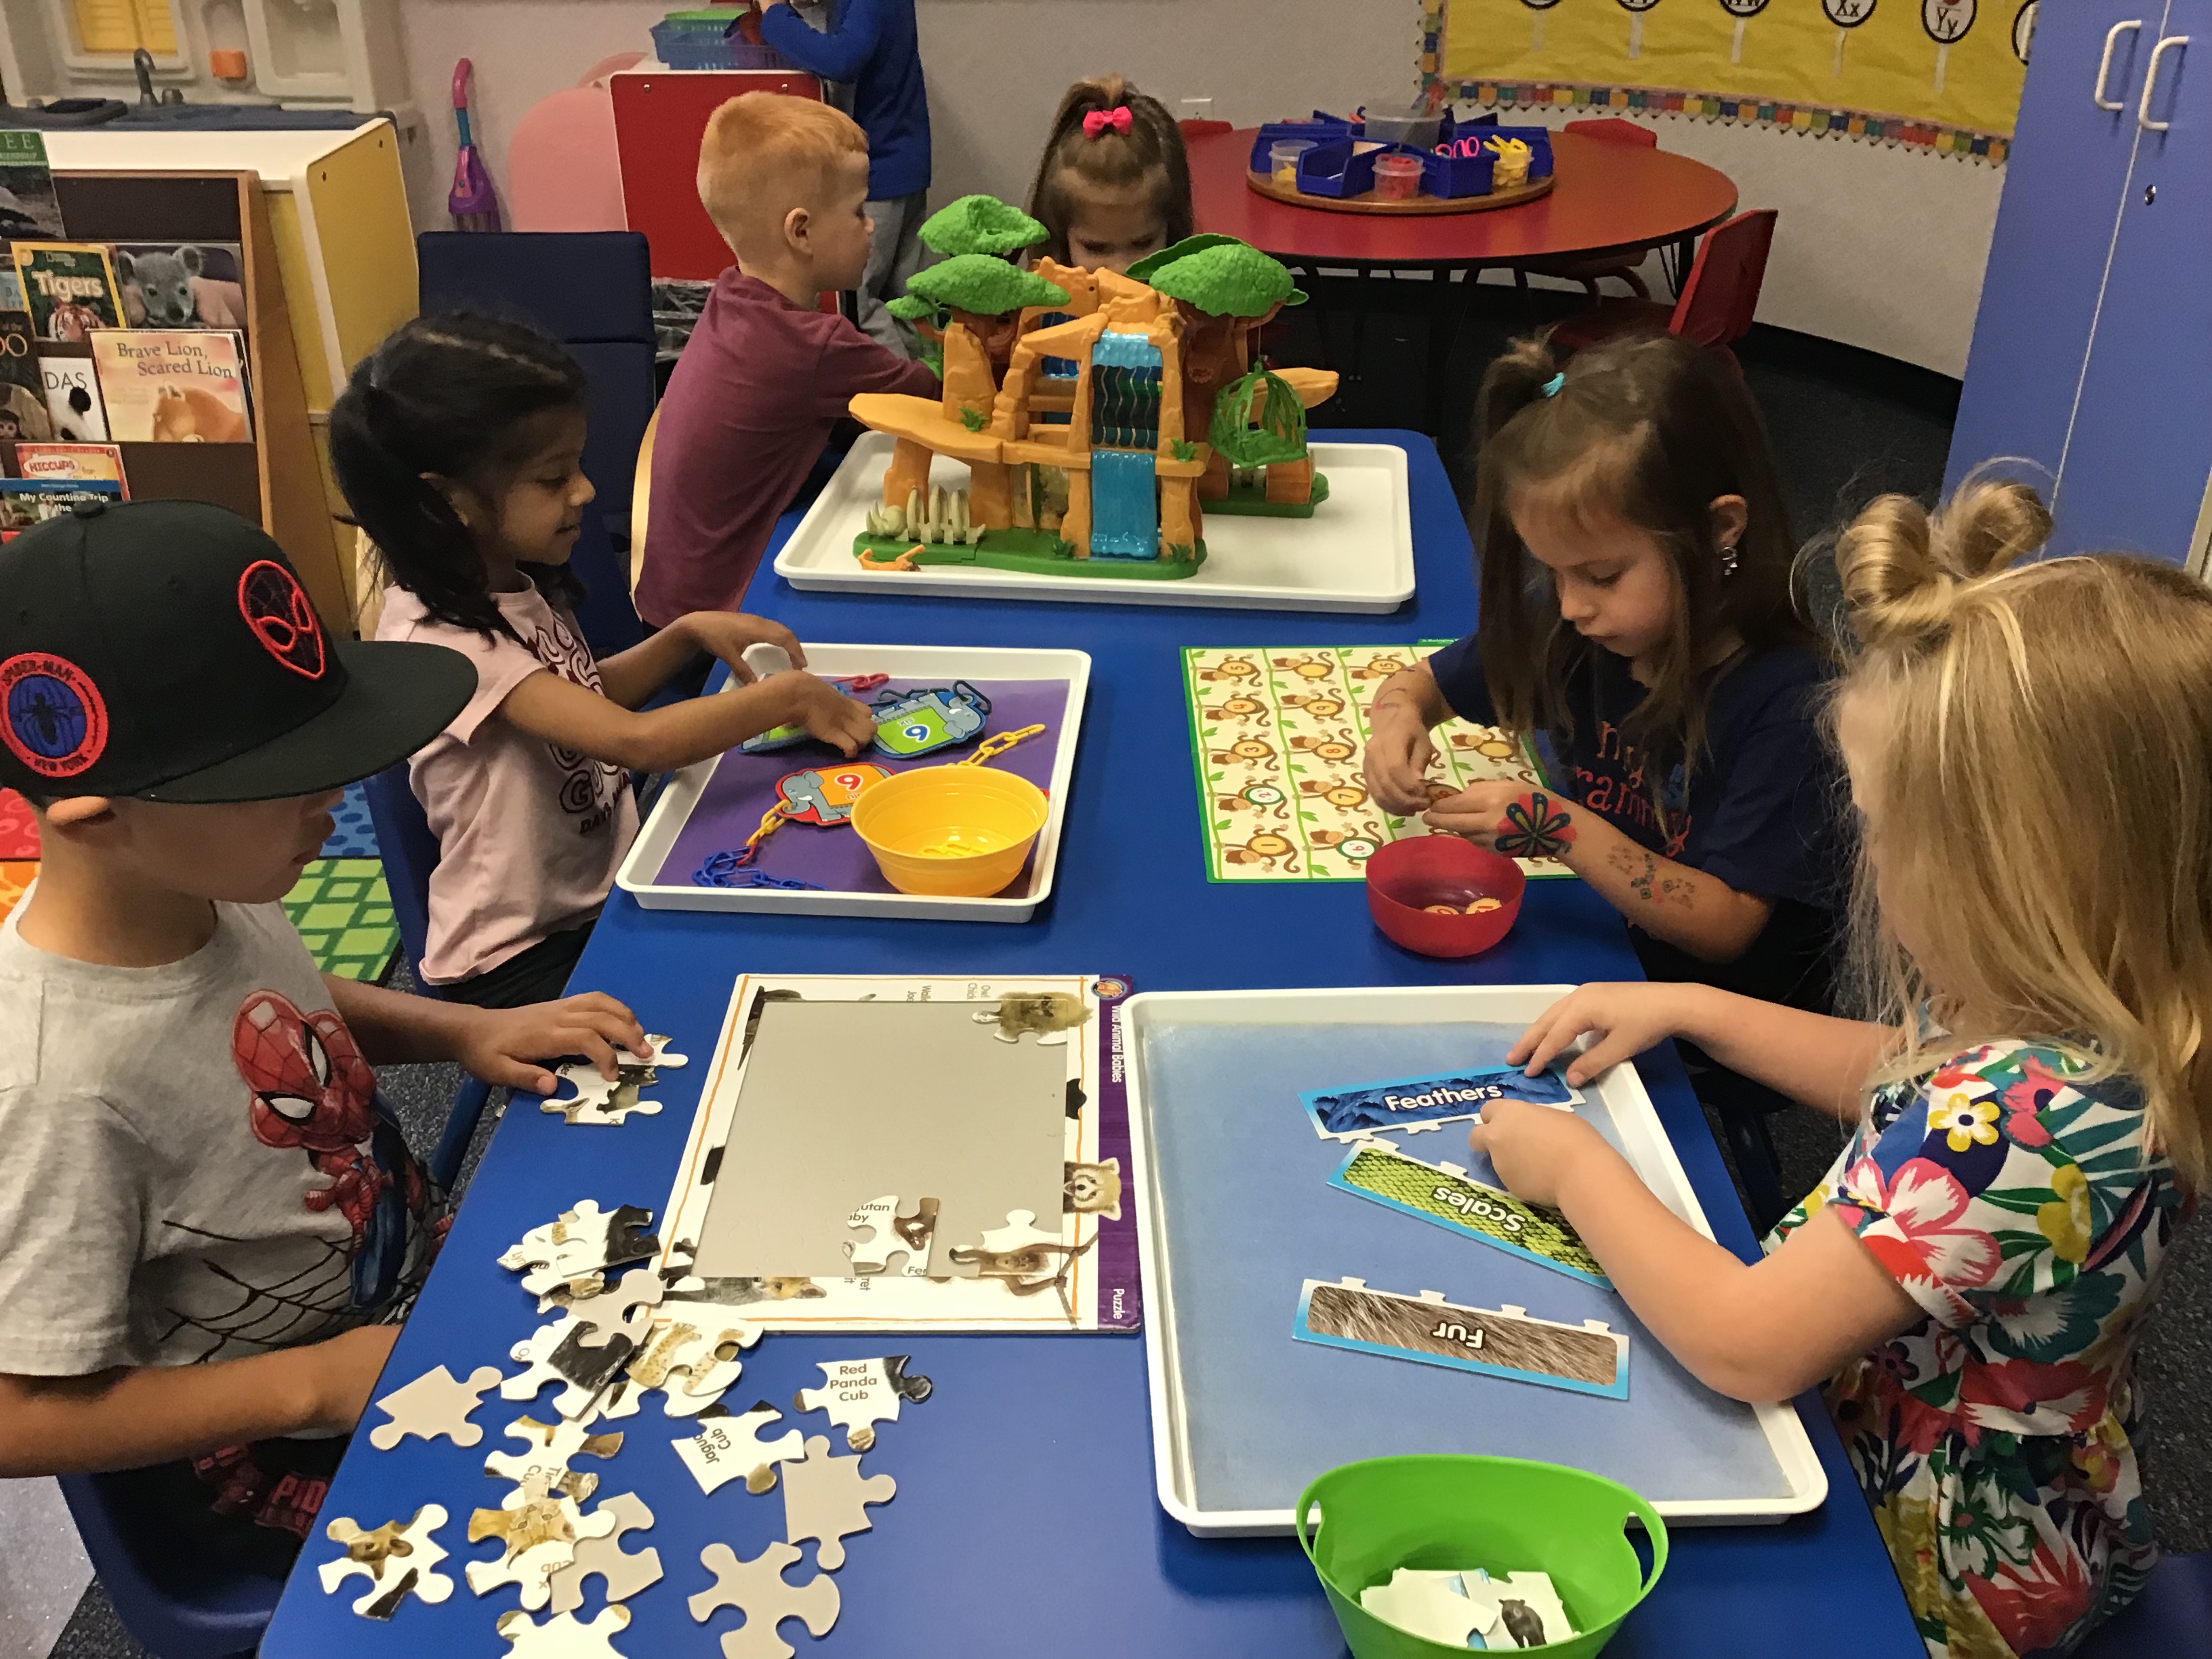 Students at the math center counting monkeys and completing a zoo puzzle.